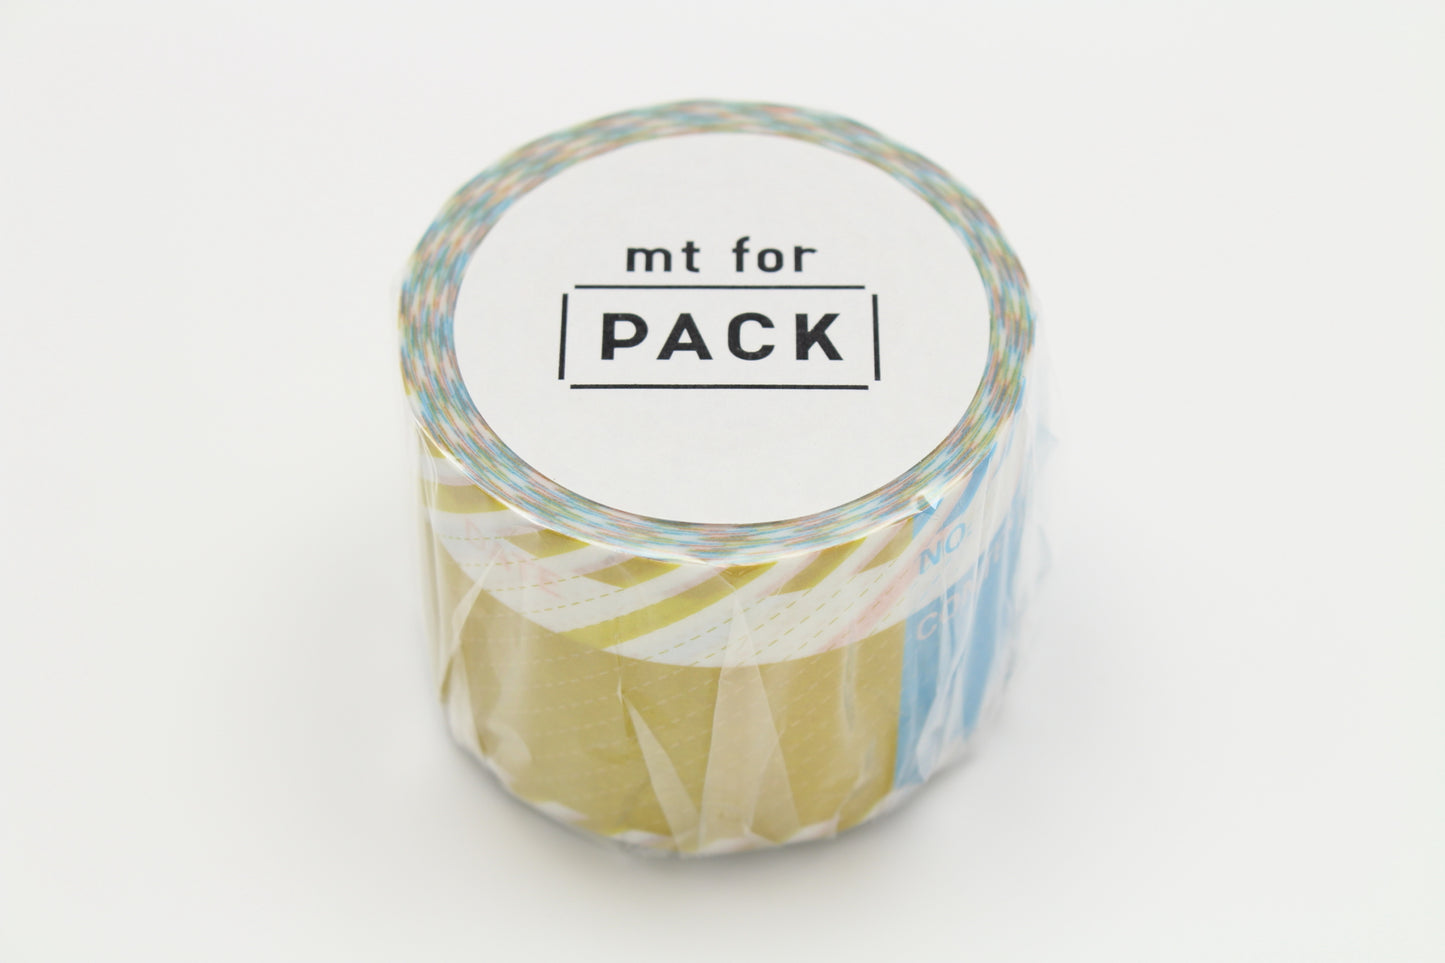 mt for pack tag